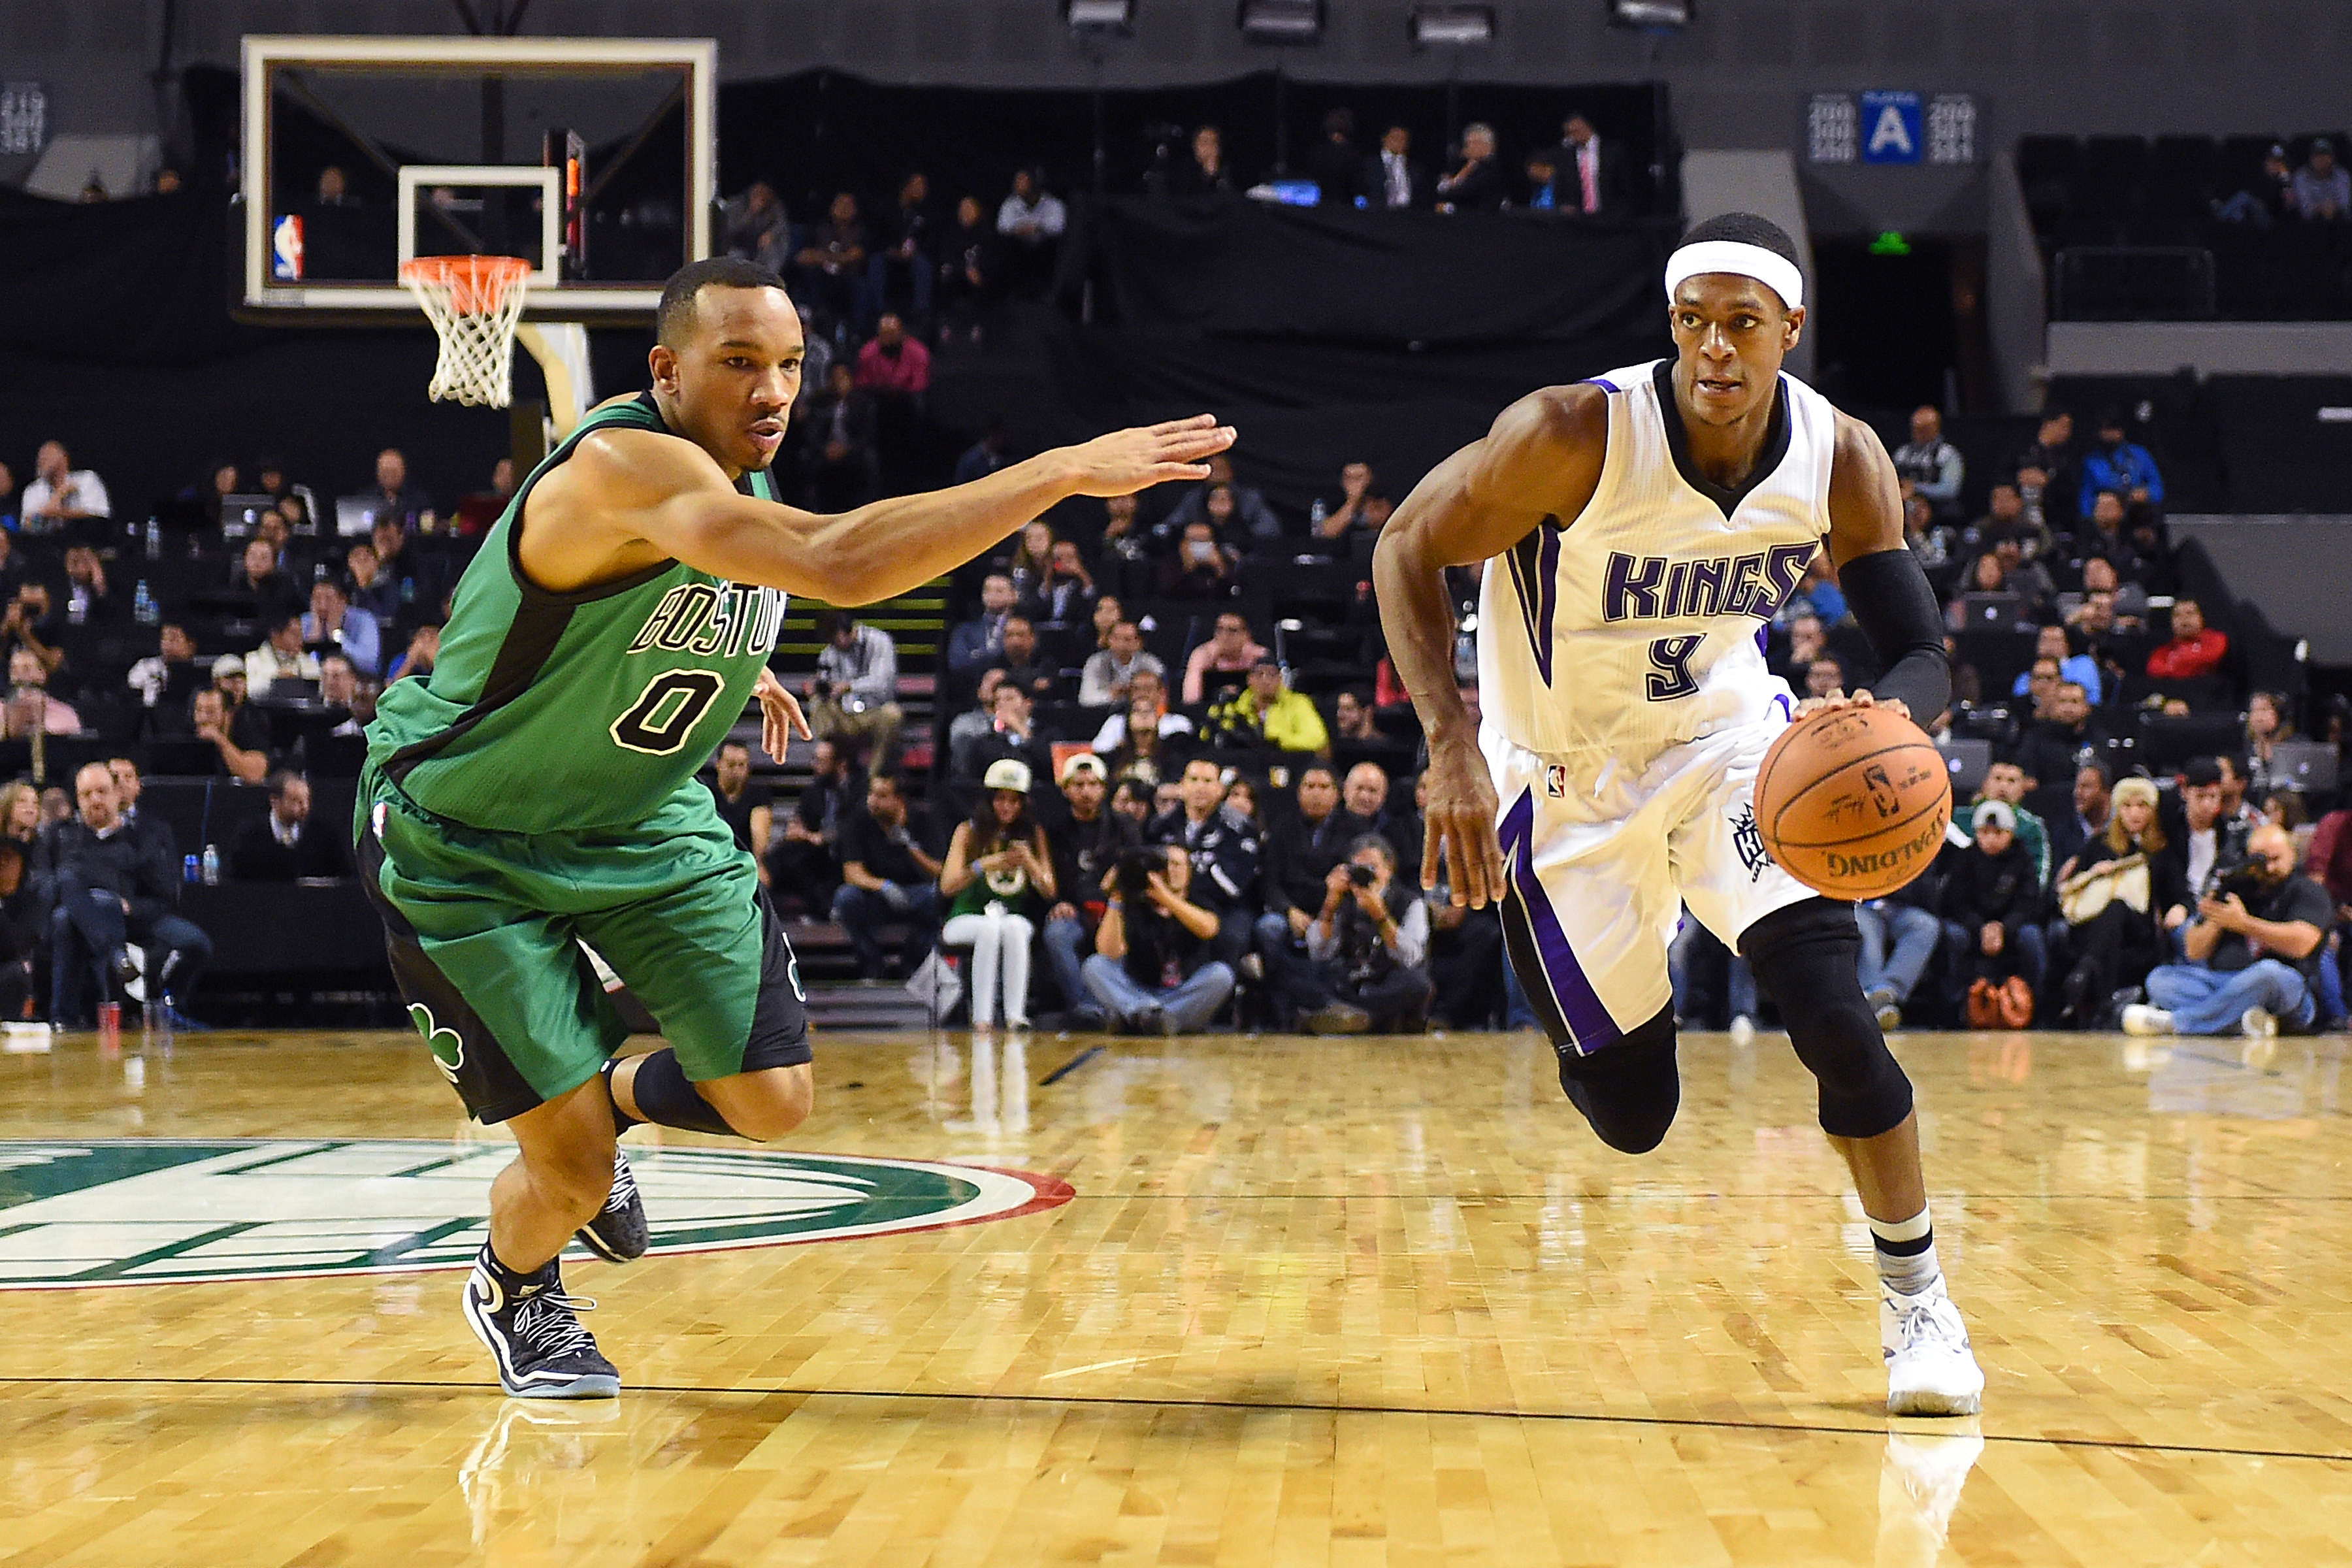 MEXICO CITY, MX - DECEMBER 3: Rajon Rondo #9 of the Sacramento Kings drives to the basket during the game against the Boston Celtics on December 3, 2015 at the Arena Ciudad de Mexico in Mexico City, Mexico. NOTE TO USER: User expressly acknowledges and agrees that, by downloading and or using this photograph, User is consenting to the terms and conditions of the Getty Images License Agreement. Mandatory Copyright Notice: Copyright 2015 NBAE  (Photo by Brian Babineau/NBAE via Getty Images)